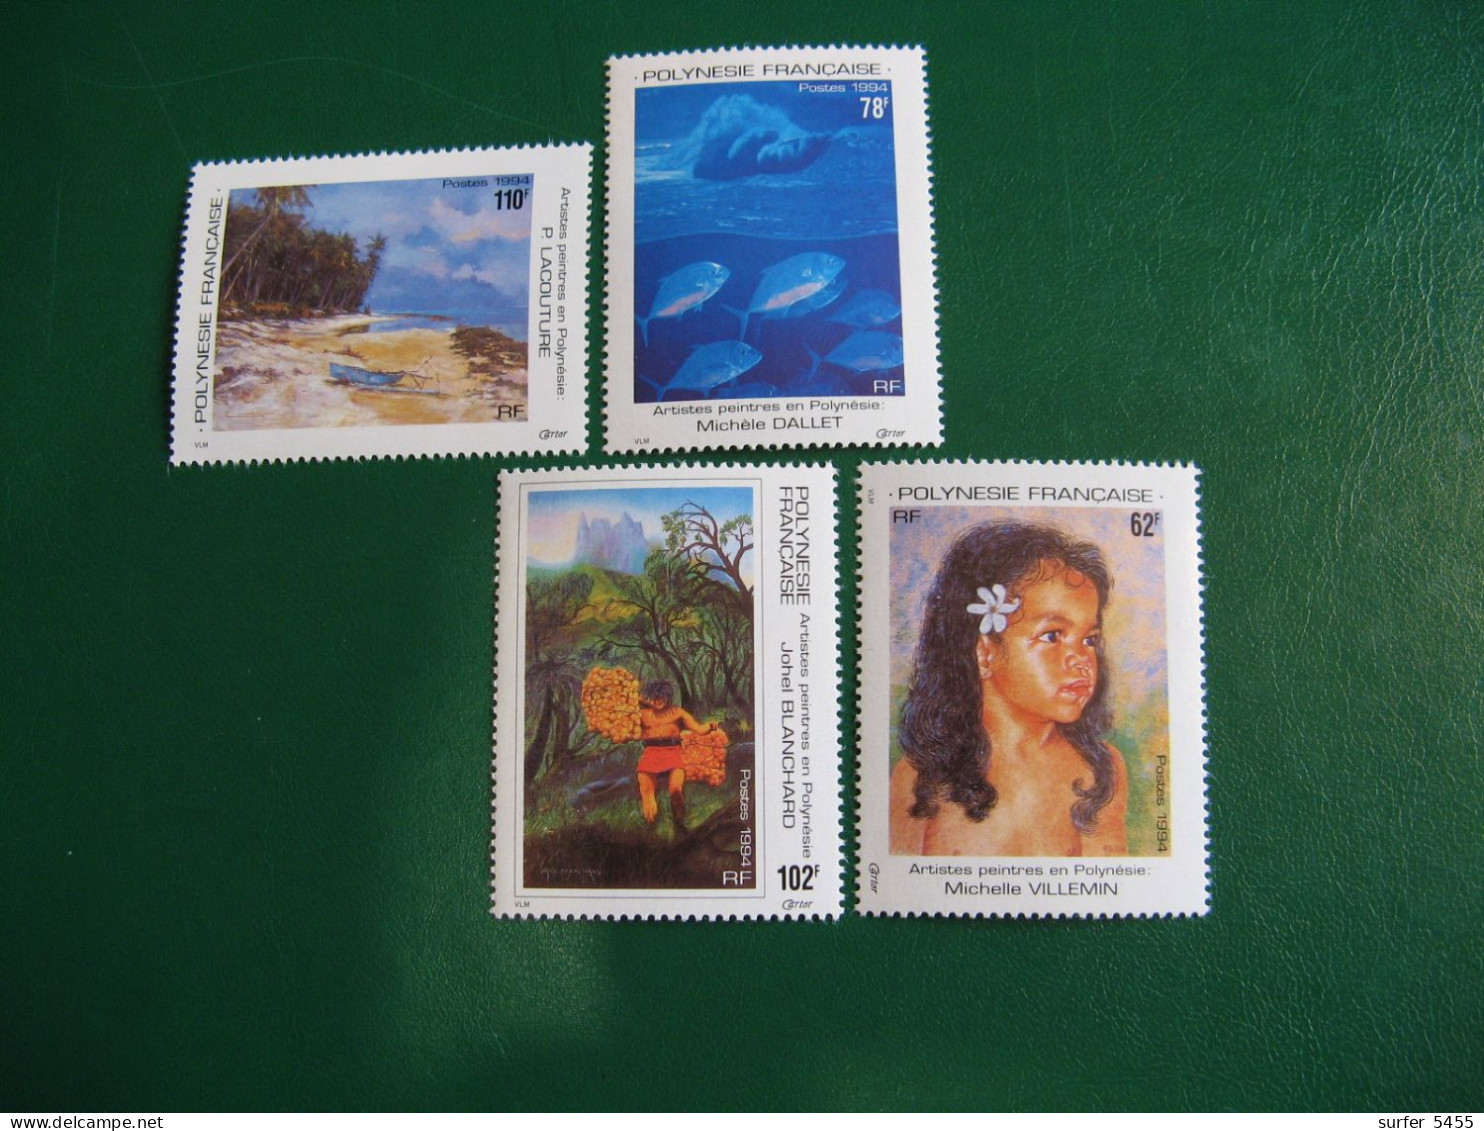 P0LYNESIE YVERT PO ORDINAIRE N° 468/471 TIMBRES NEUFS ** LUXE - MNH - SERIE COMPLETE - COTE 11,00 EUROS - Unused Stamps